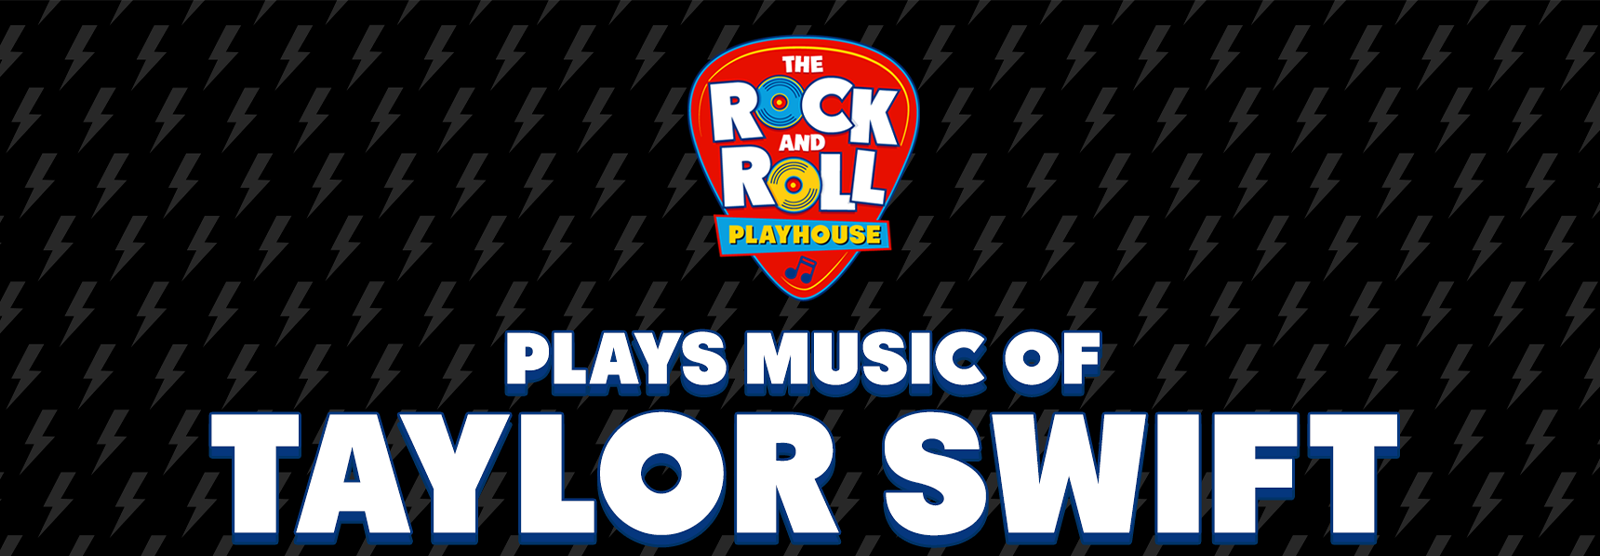 The Rock and Roll Playhouse Plays Music of Taylor Swift + More for Kids